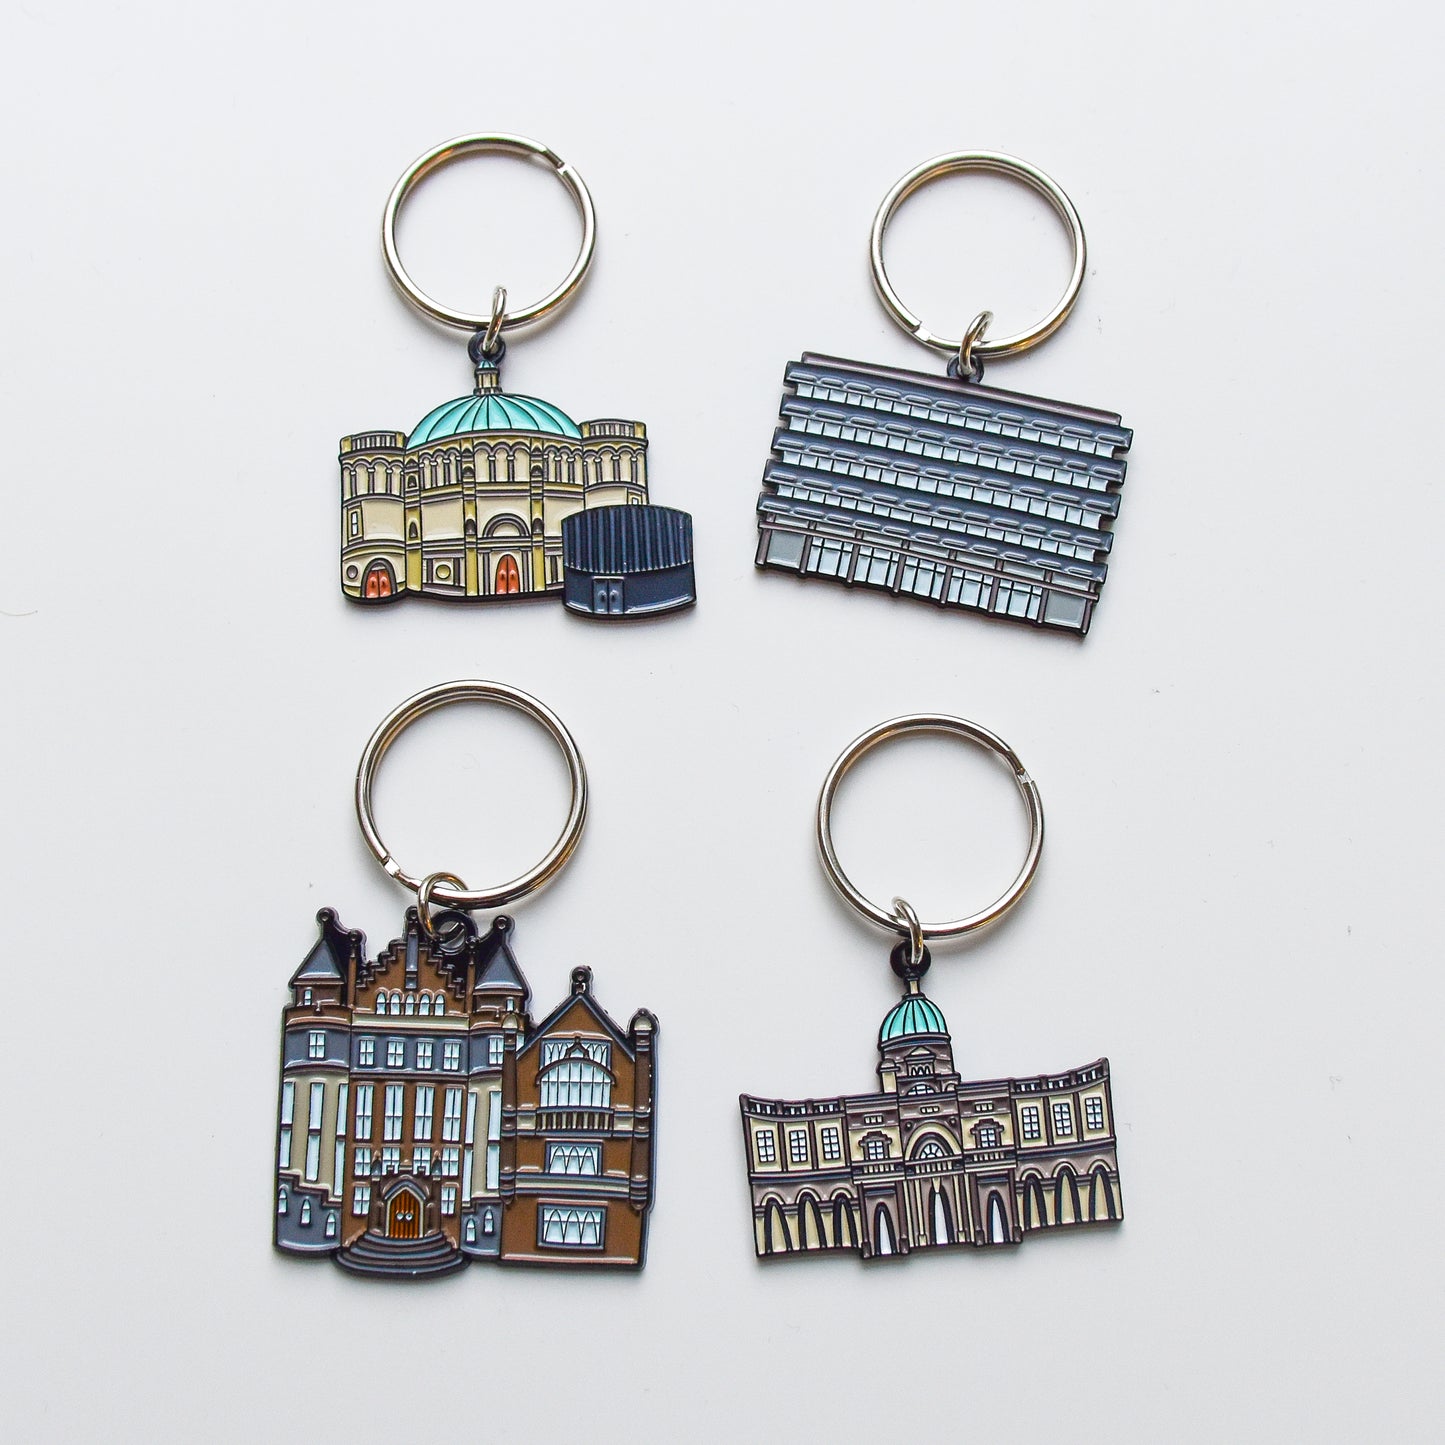 Our range of Enamel Keyrings featuring designs of Mc Ewan Hall, The Main Library , Teviot Row House & Old College.